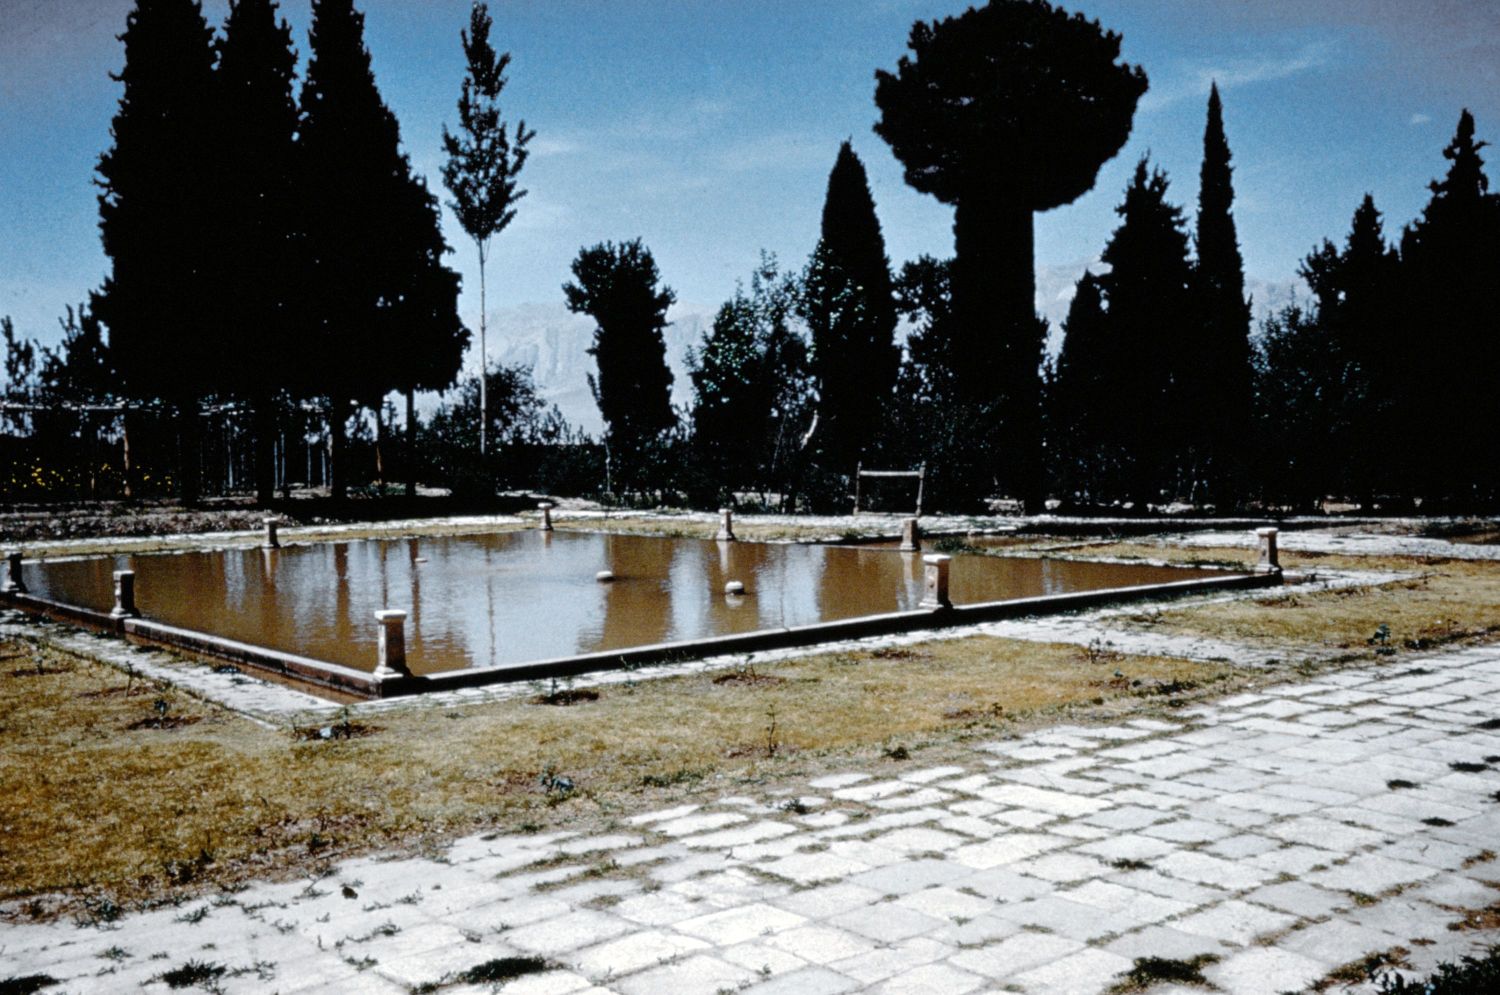 View of the pool in front of the upper pavilion.